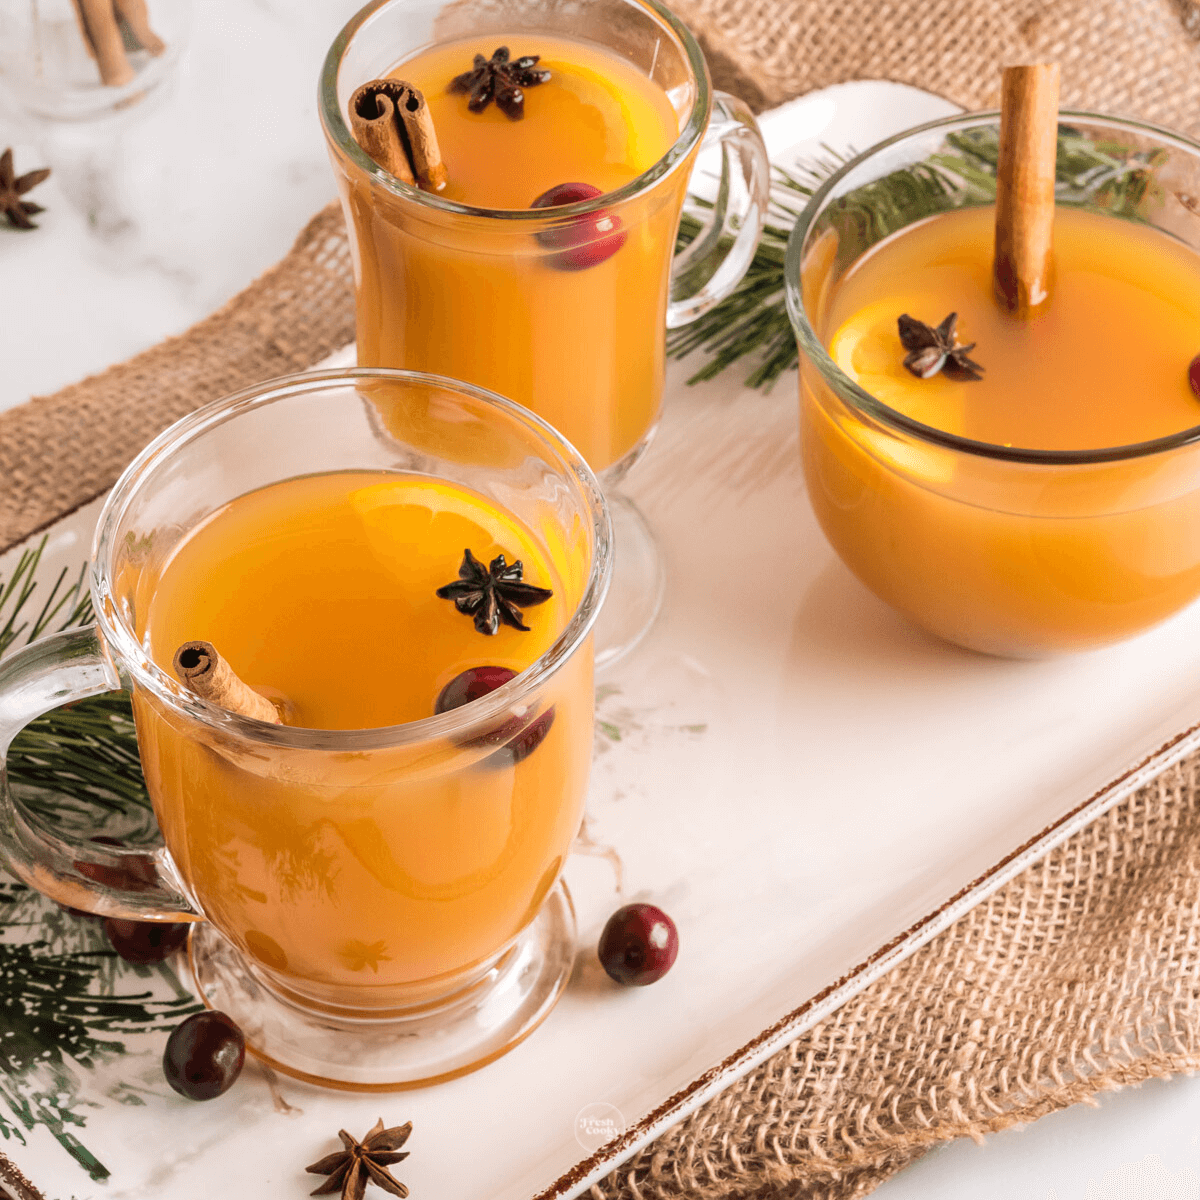 Hot Wassail in pretty glass mugs garnished with cinnamon sticks and star anise.